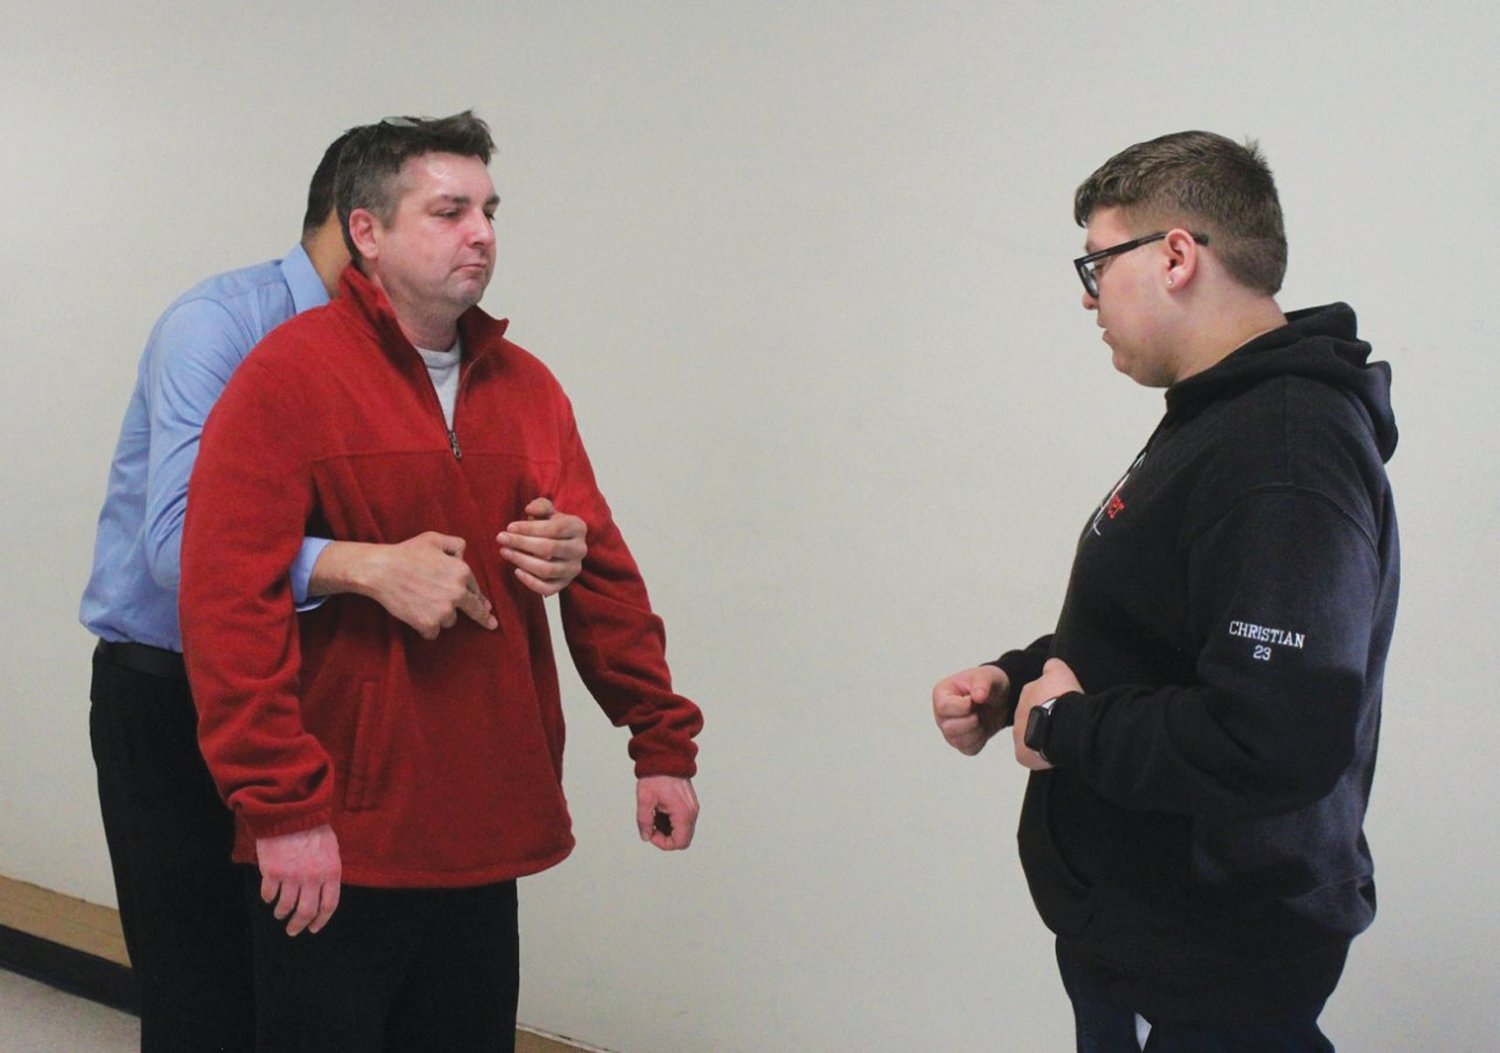 LOOKING ON: Christian LaPorte (right) instructs coaches on how to assist someone that is choking.